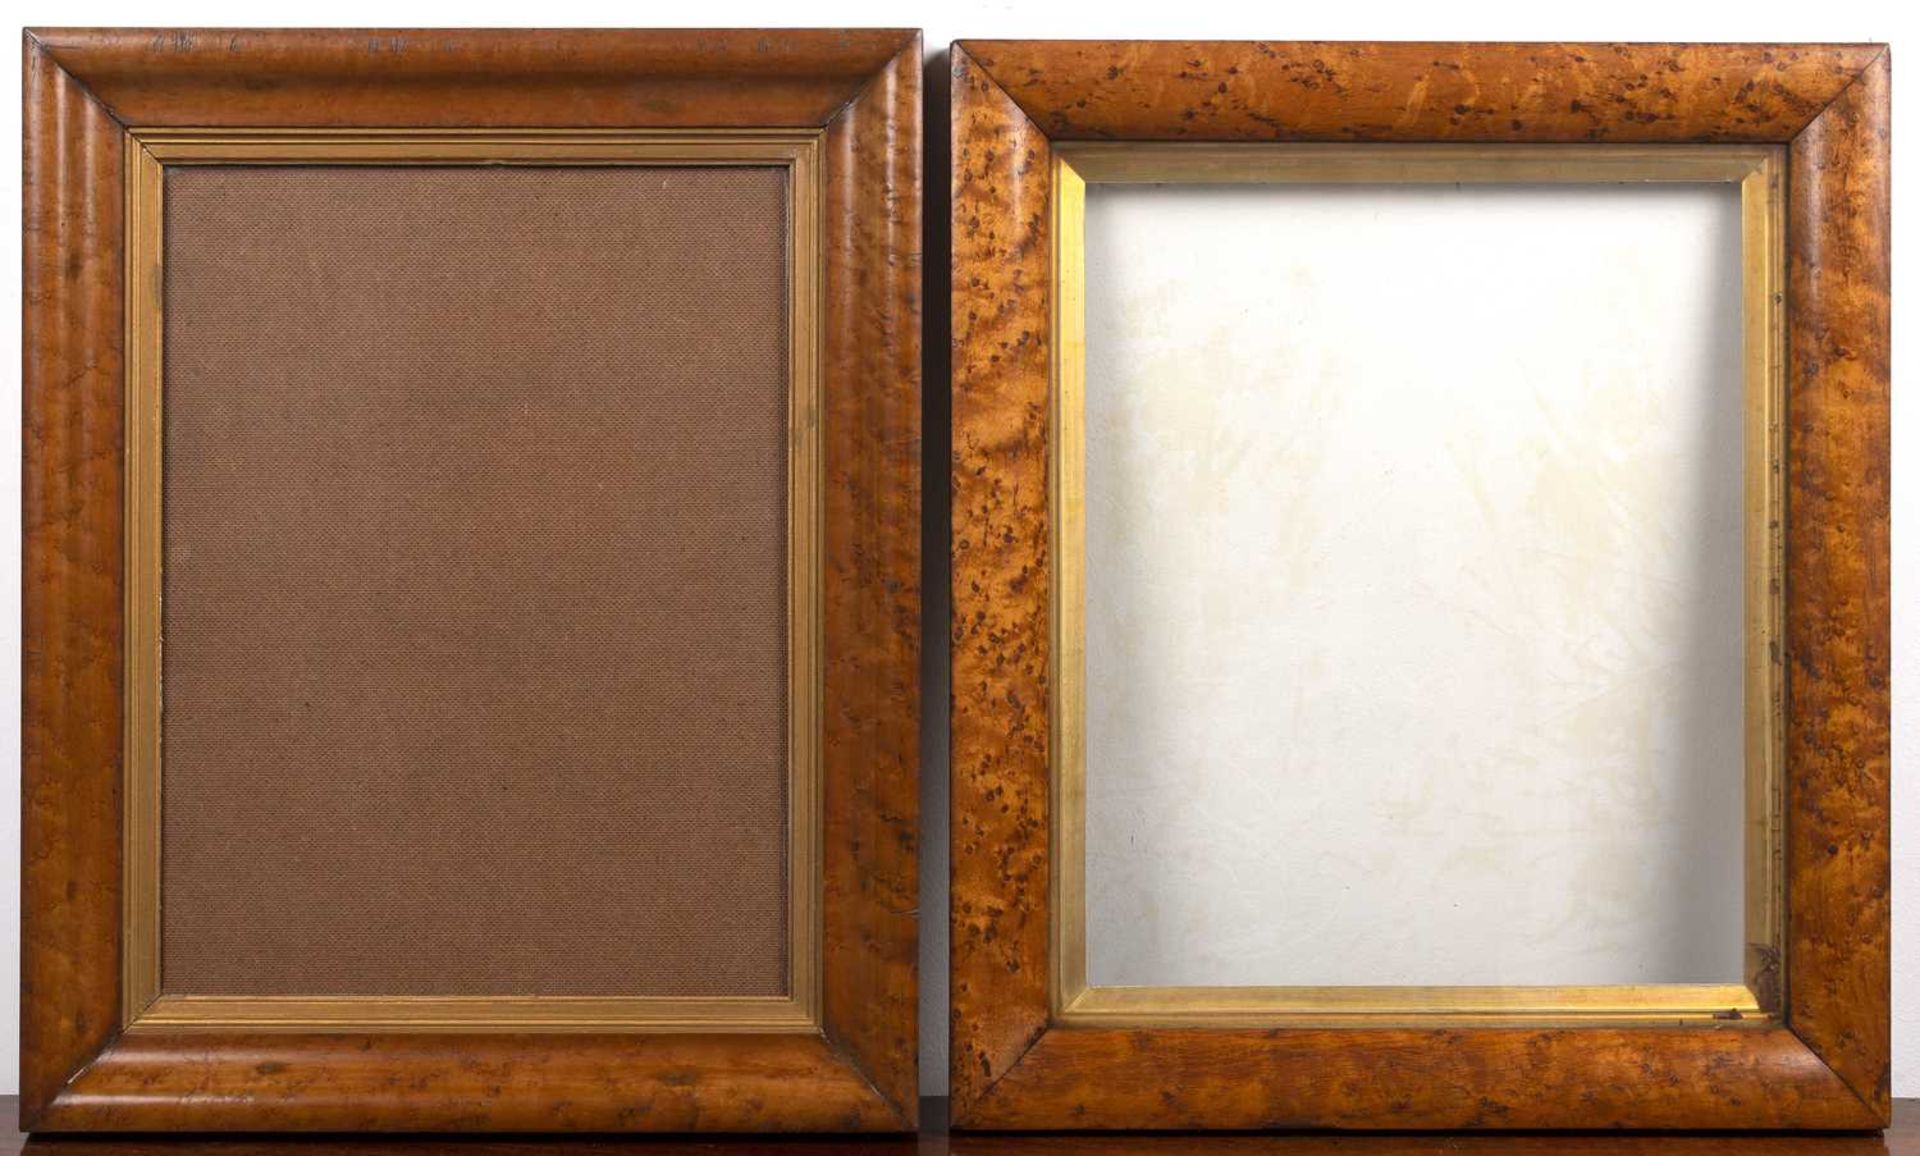 Two maplewood frames 19th Century, 56.5cm x 47cm and 56cm x 49cmSome wear and marks consistent